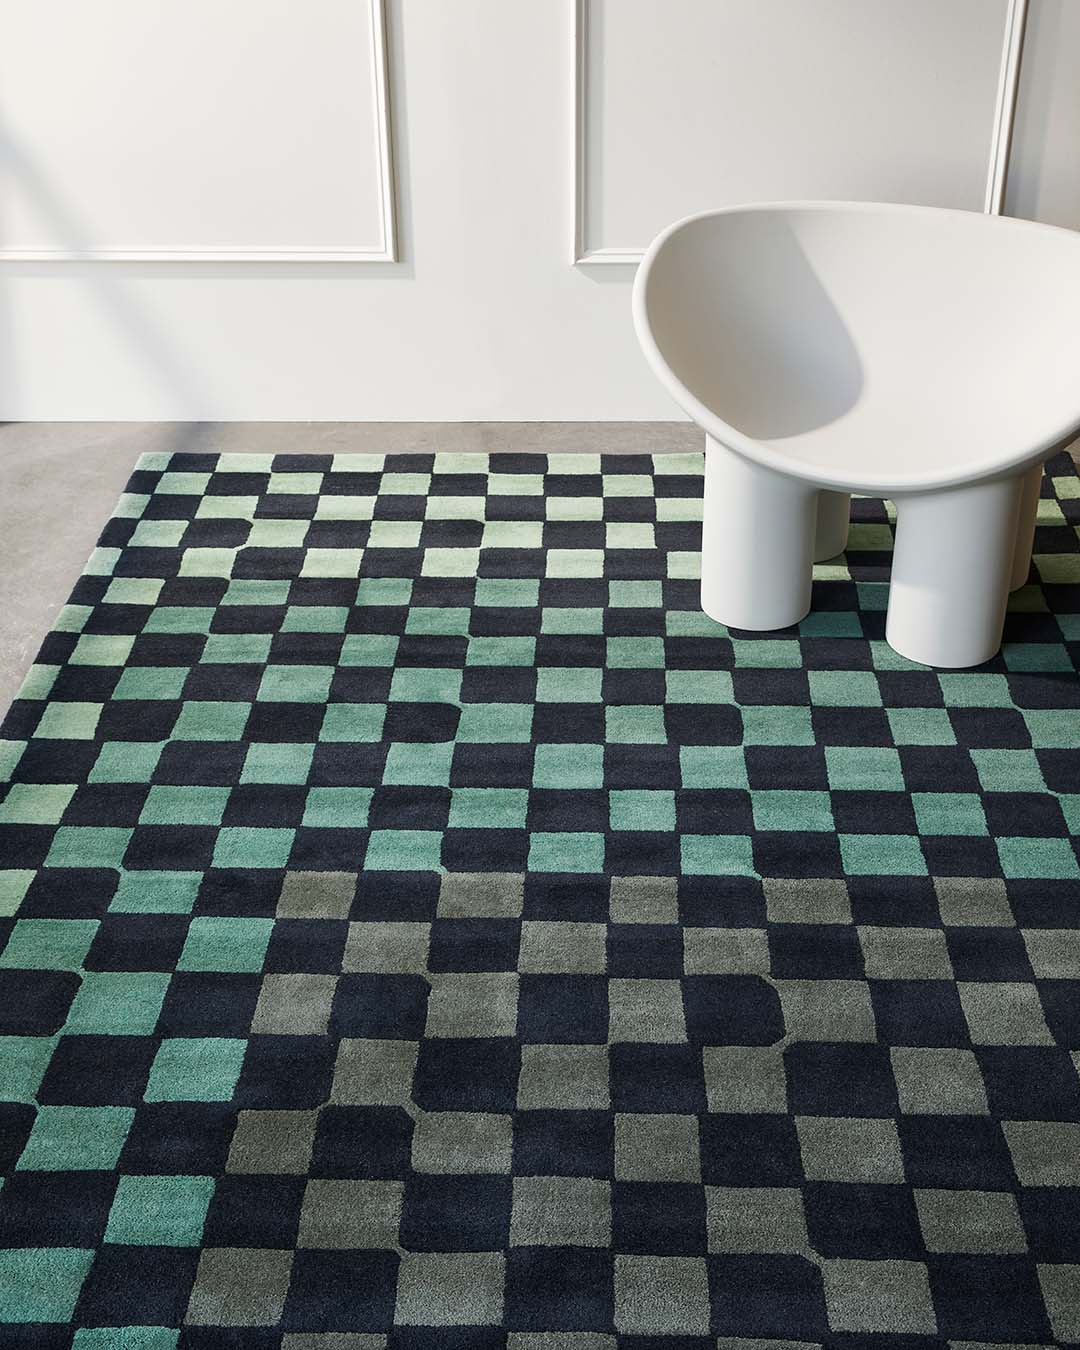 styled image of checkered Checkmate rug in green